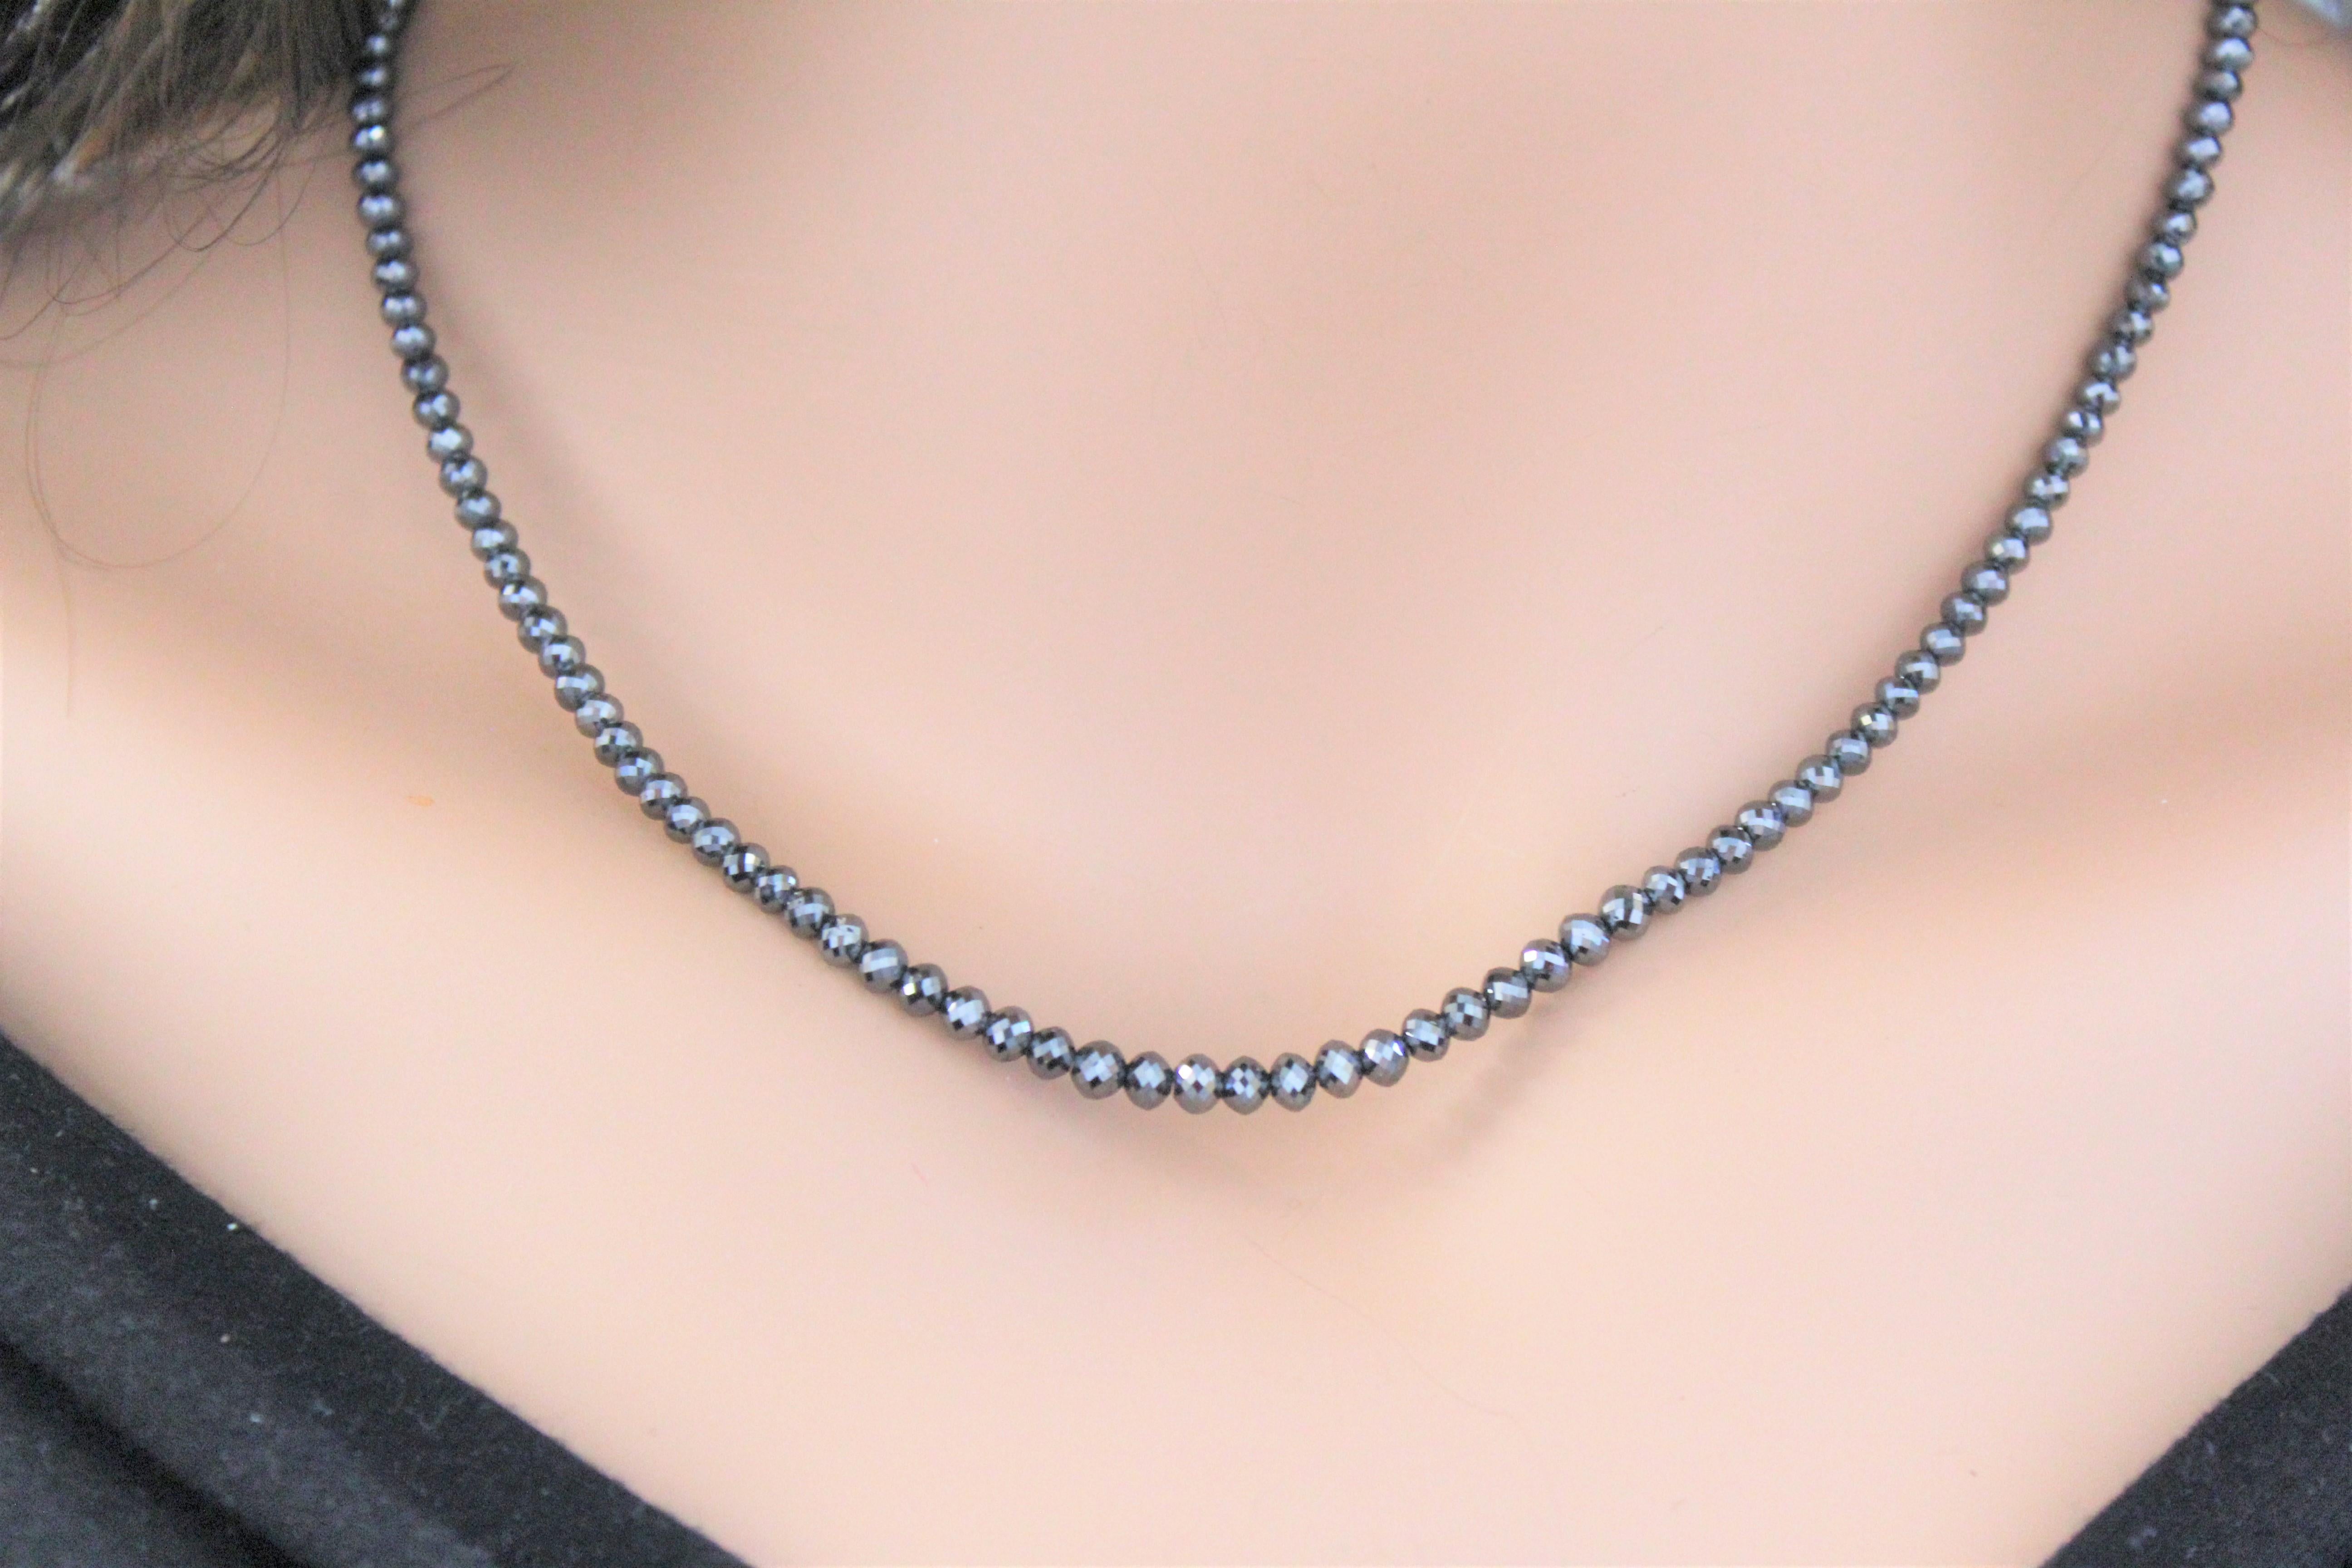 This necklace is a dramatic strand of 146 faceted briolette black diamonds totaling 49.32  carats. Slim in design and perfect for layering alongside other necklaces and chains, this black diamond necklace is sure to get noticed.